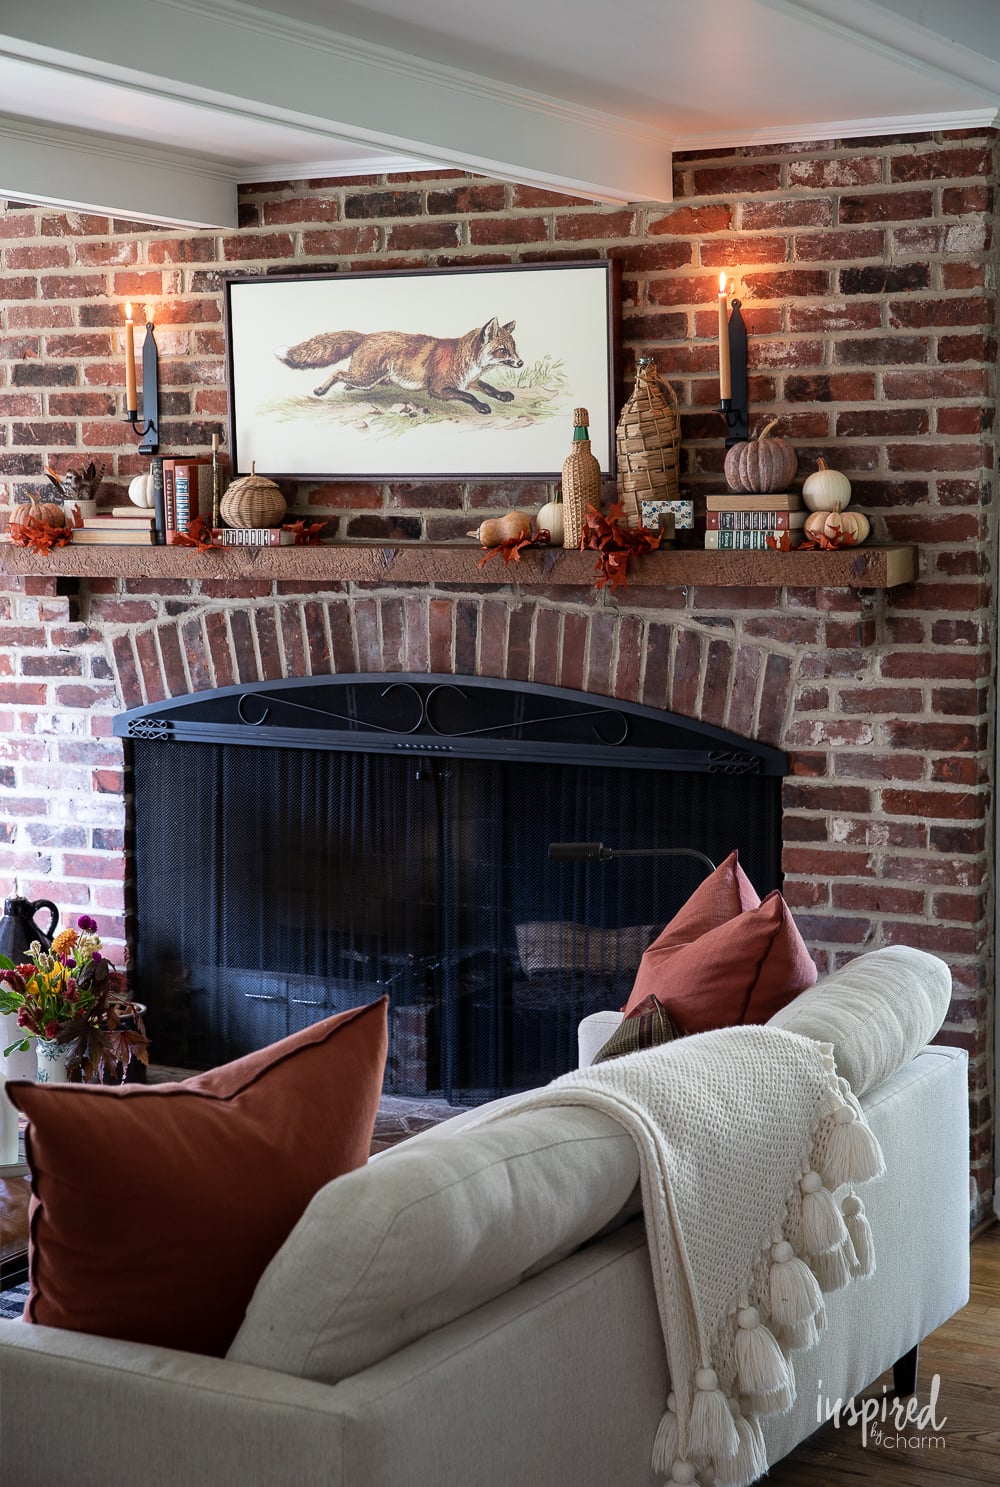 Fall Mantel Decor - Inspired by Charm